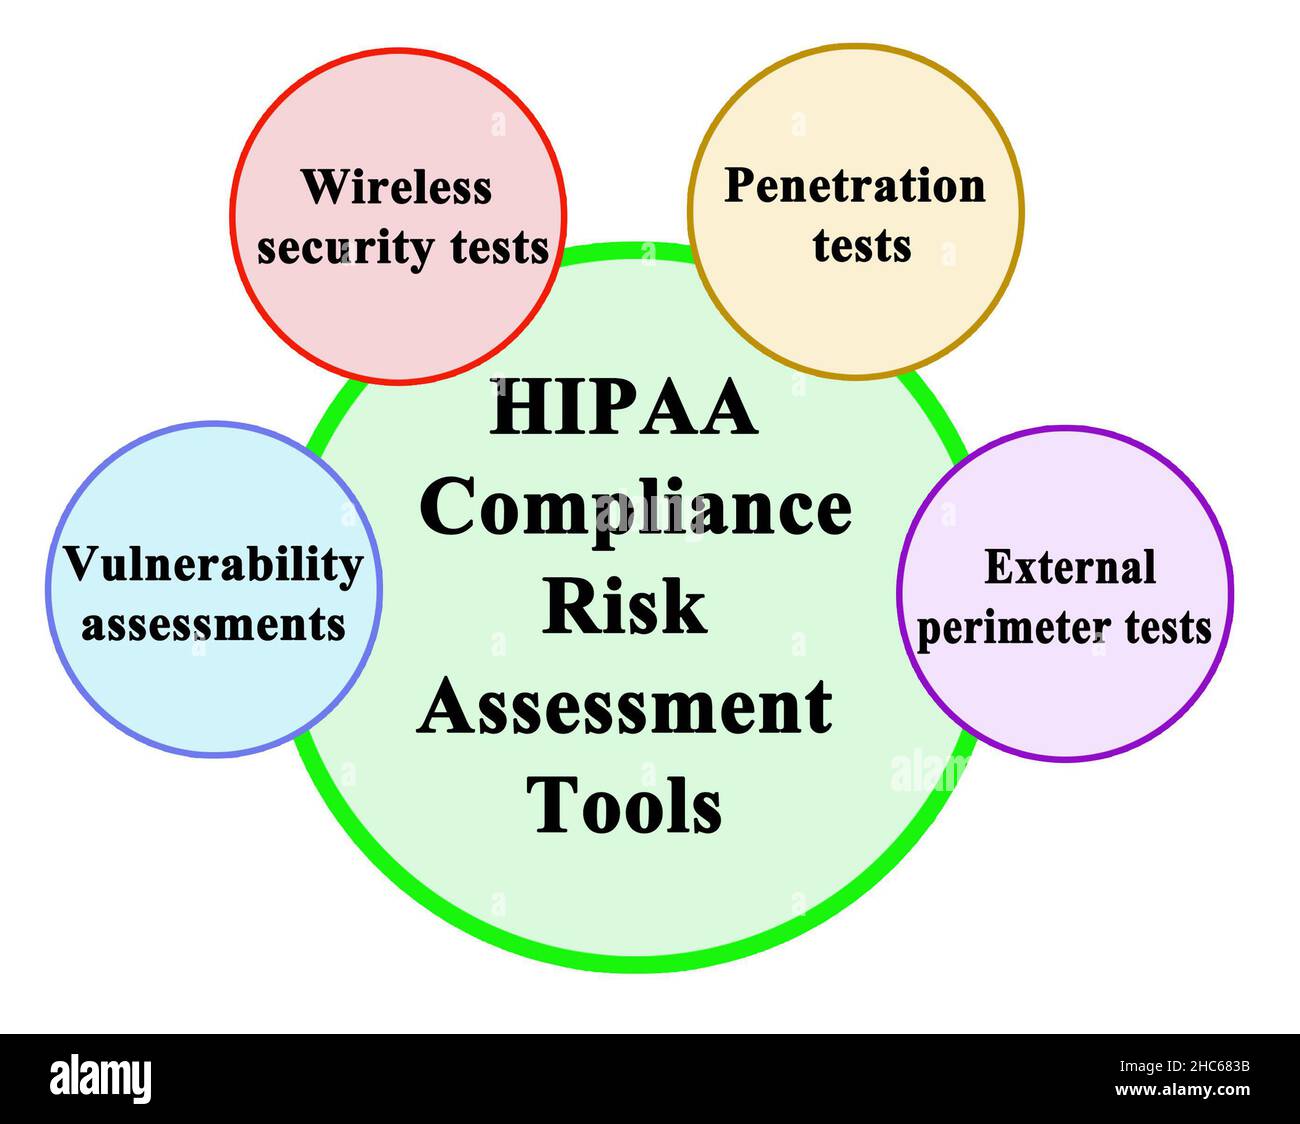 HIPAA Compliance Risk Assessment Tools Stock Photo